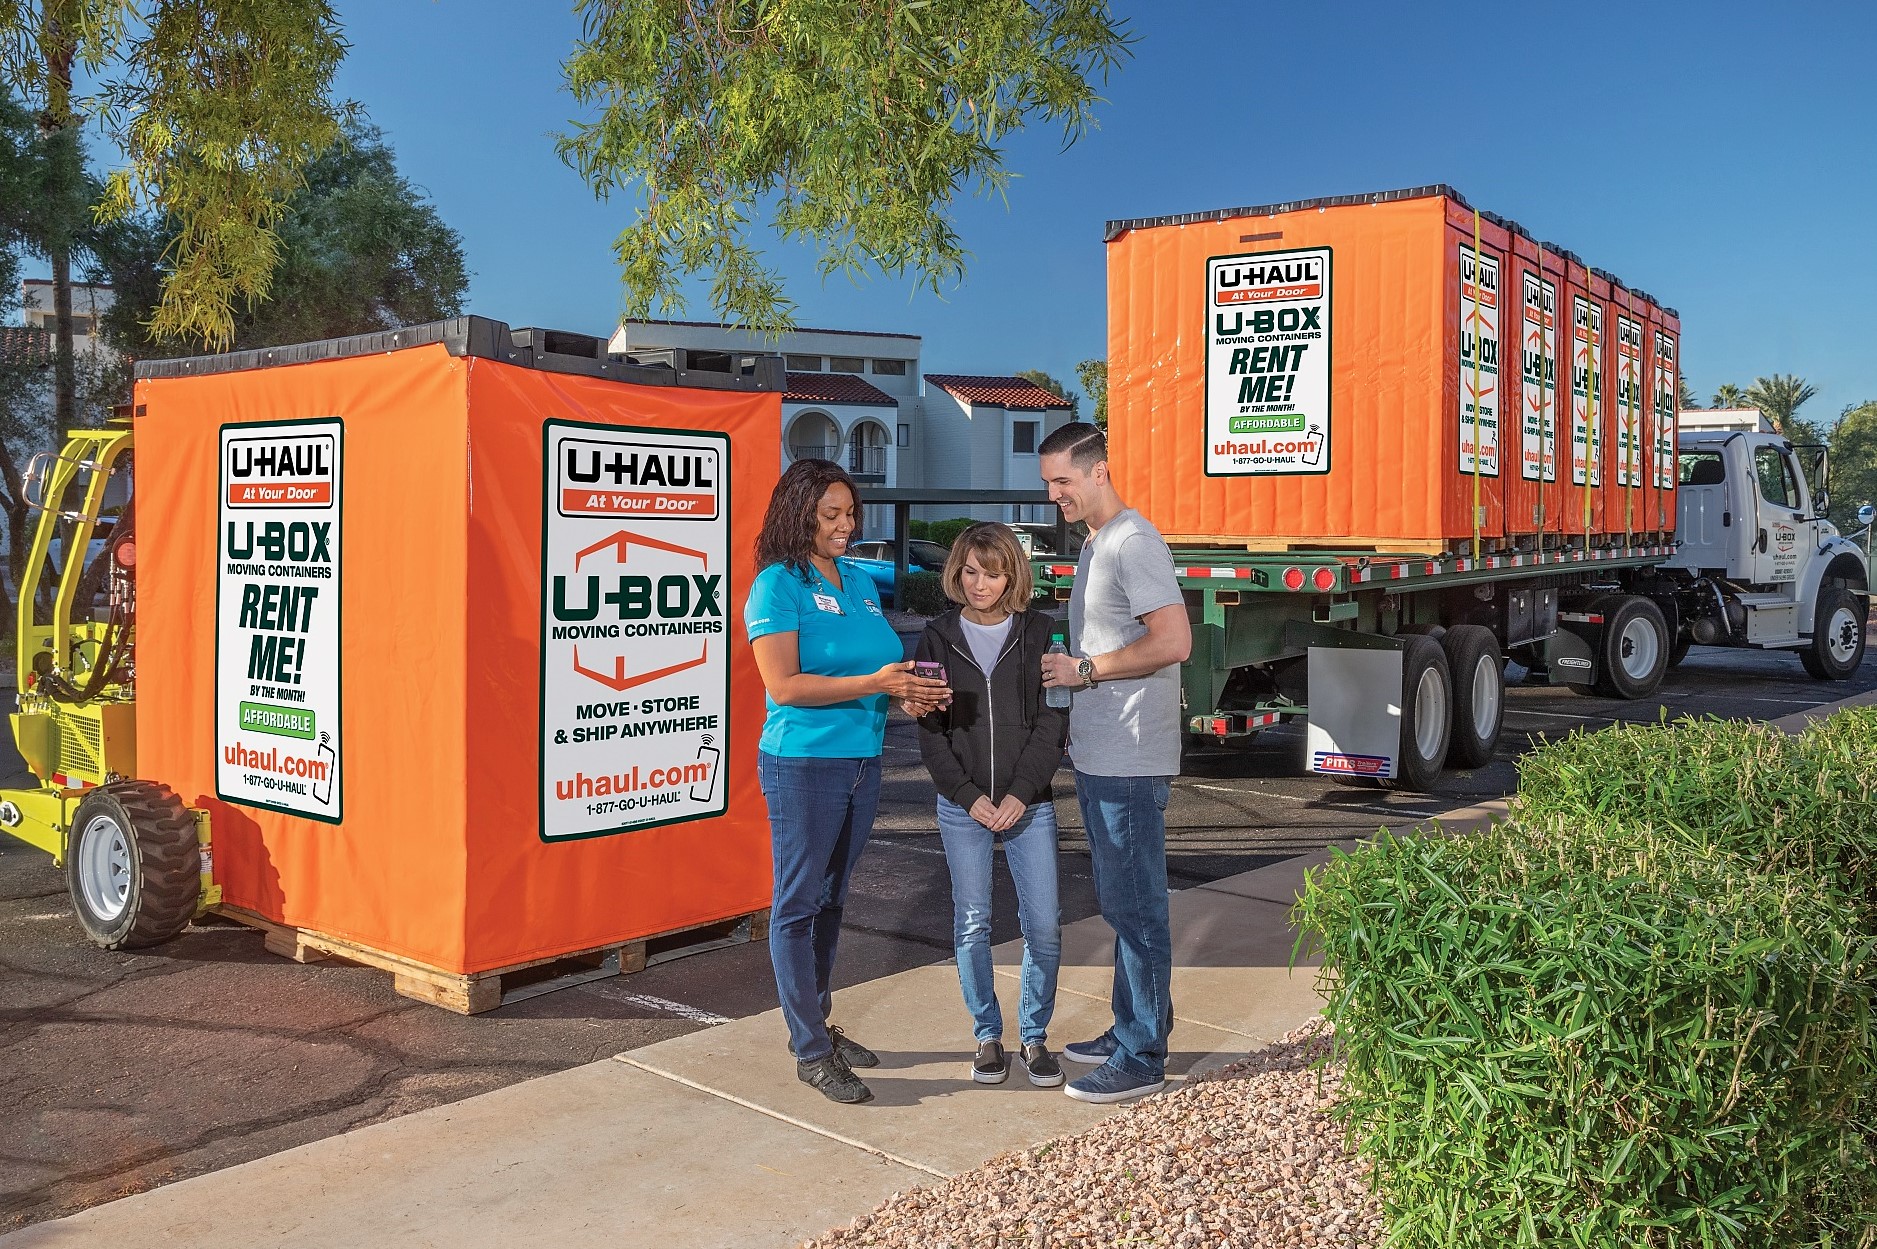 U-Box Named Industry’s Best Moving Container by BobVila.com